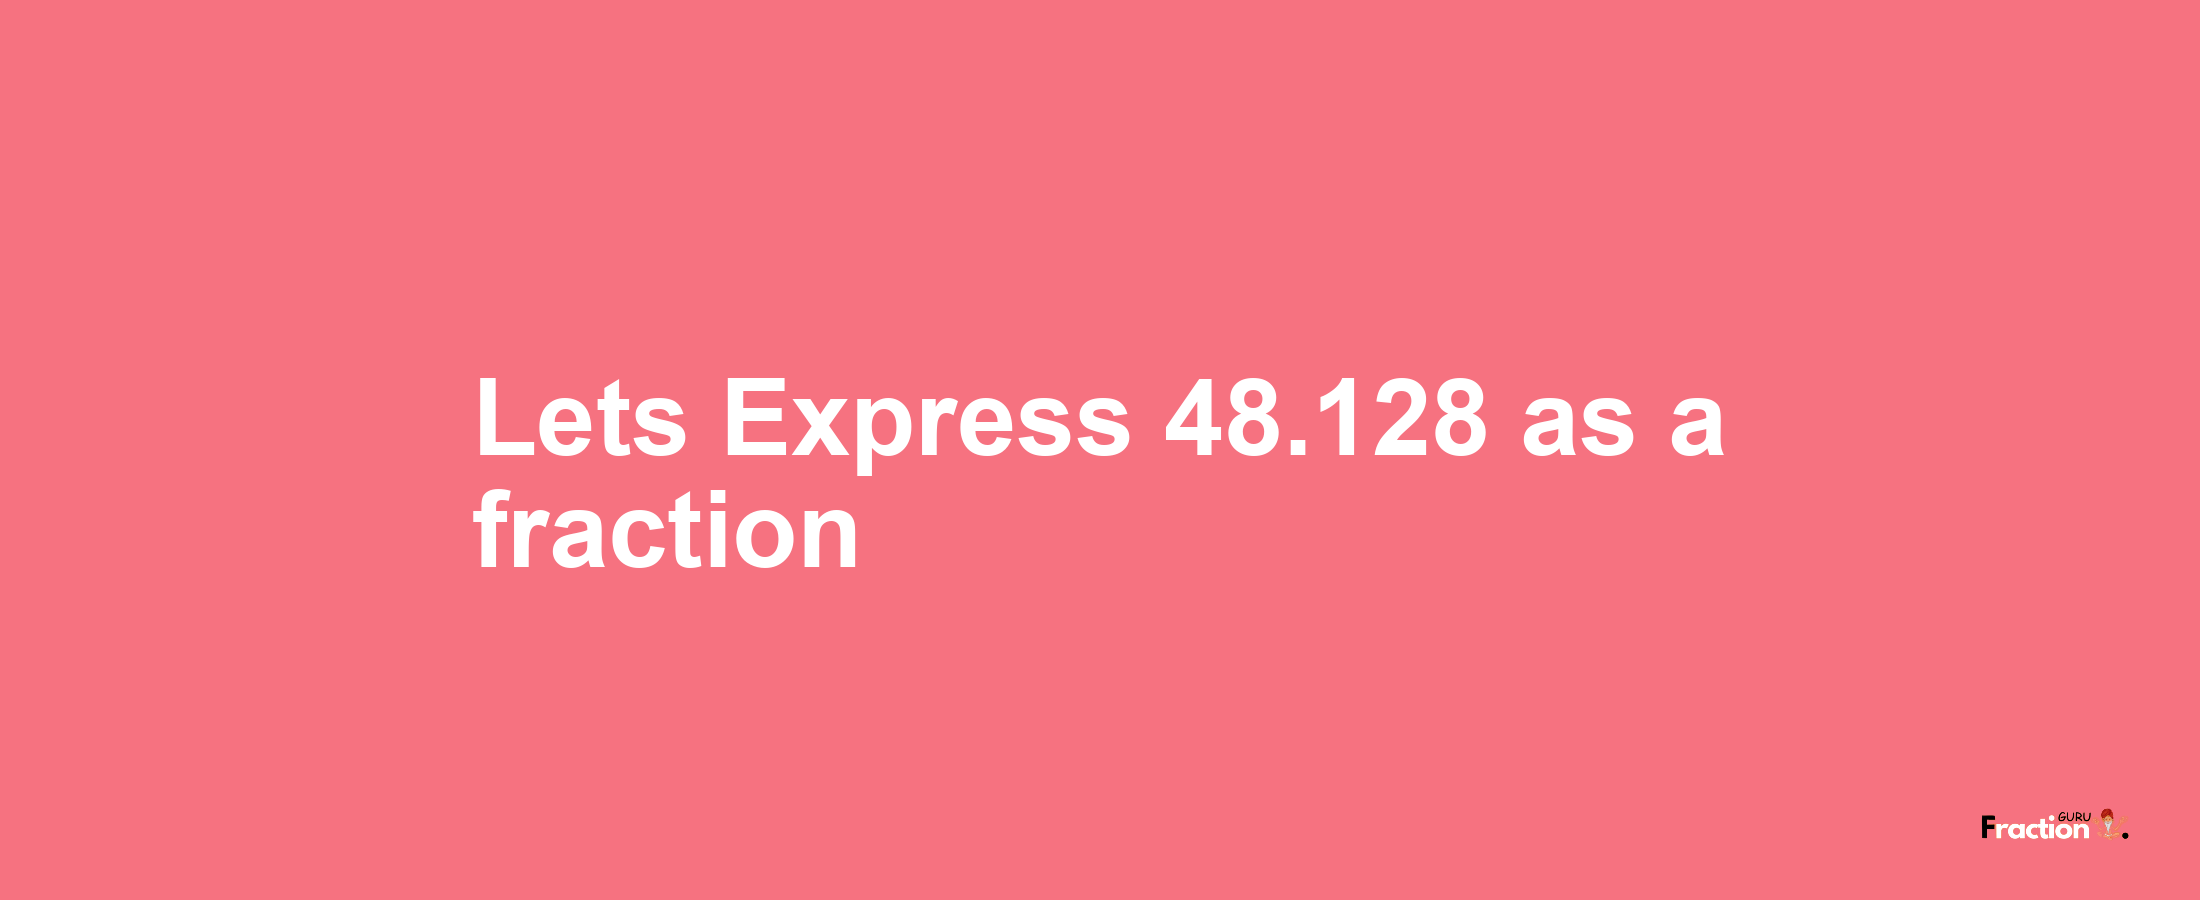 Lets Express 48.128 as afraction